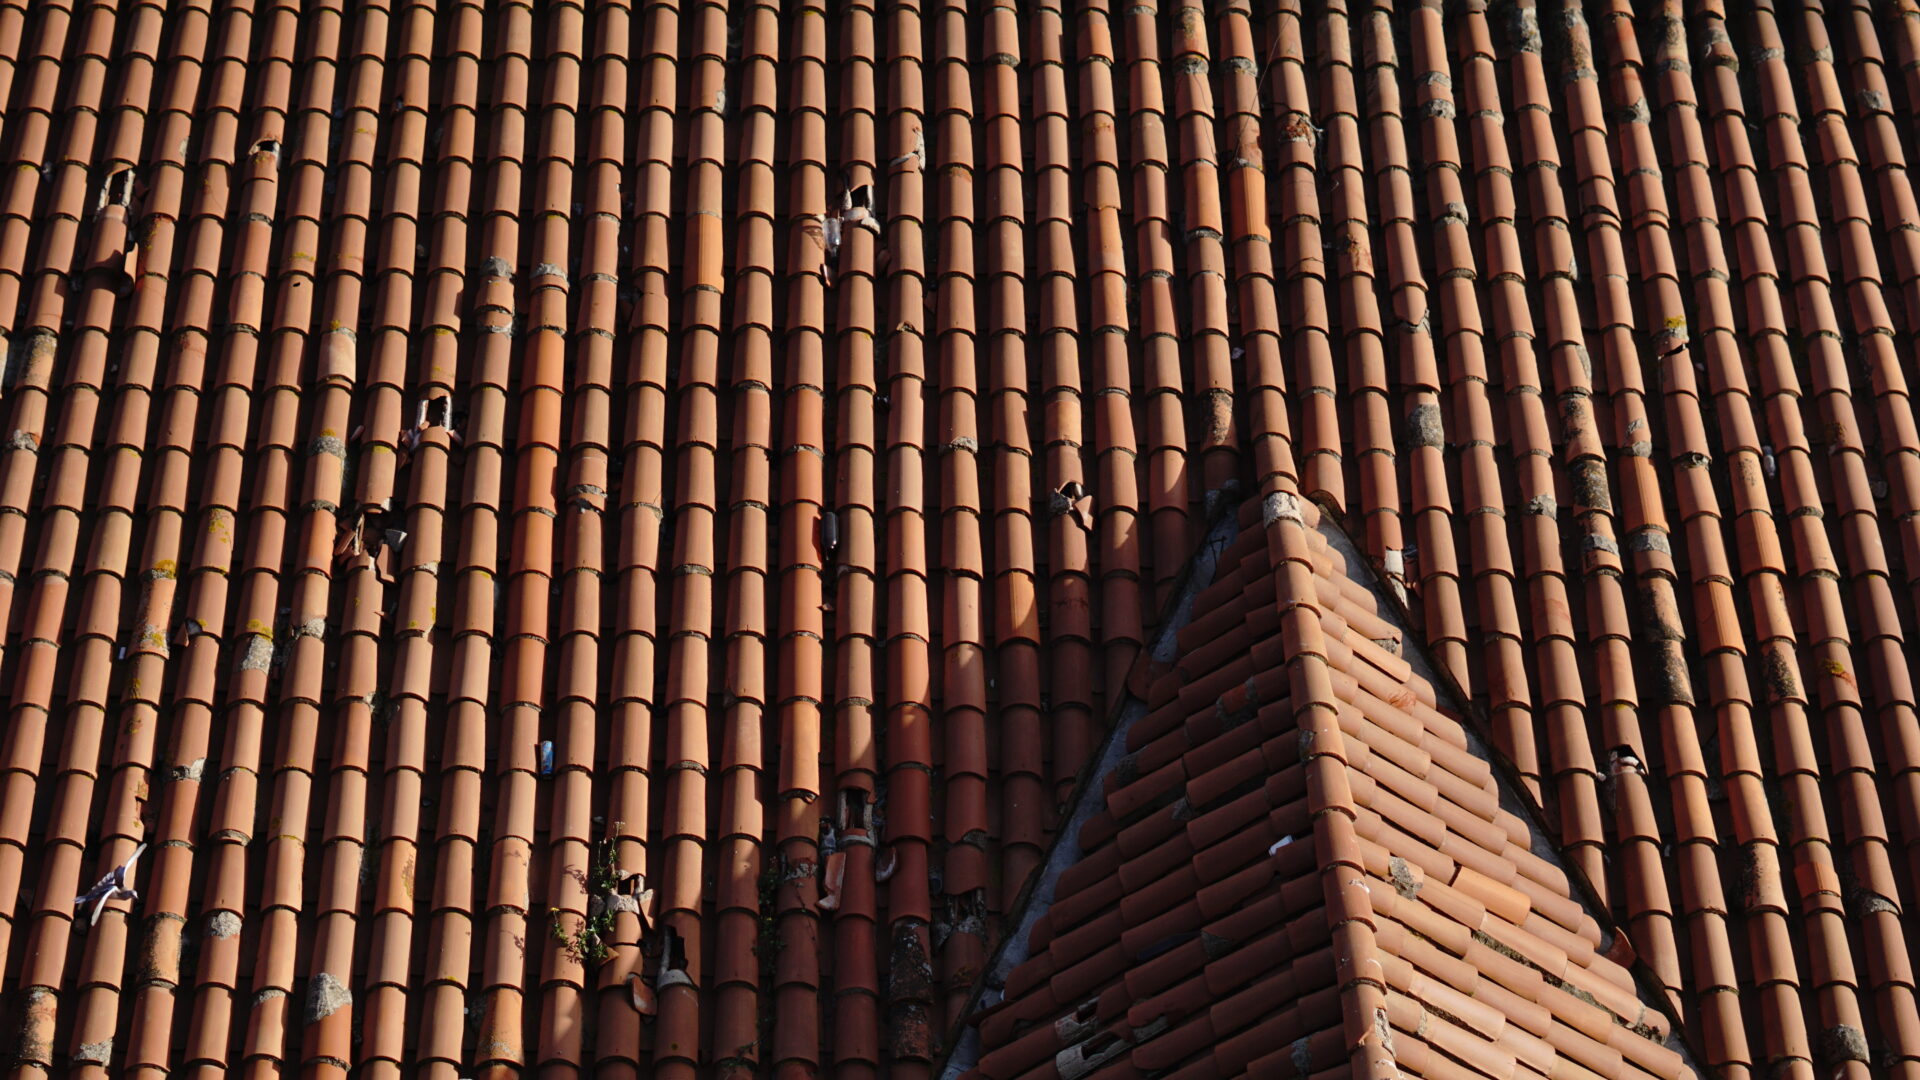 Aerial view of red tile roof with broken tiles